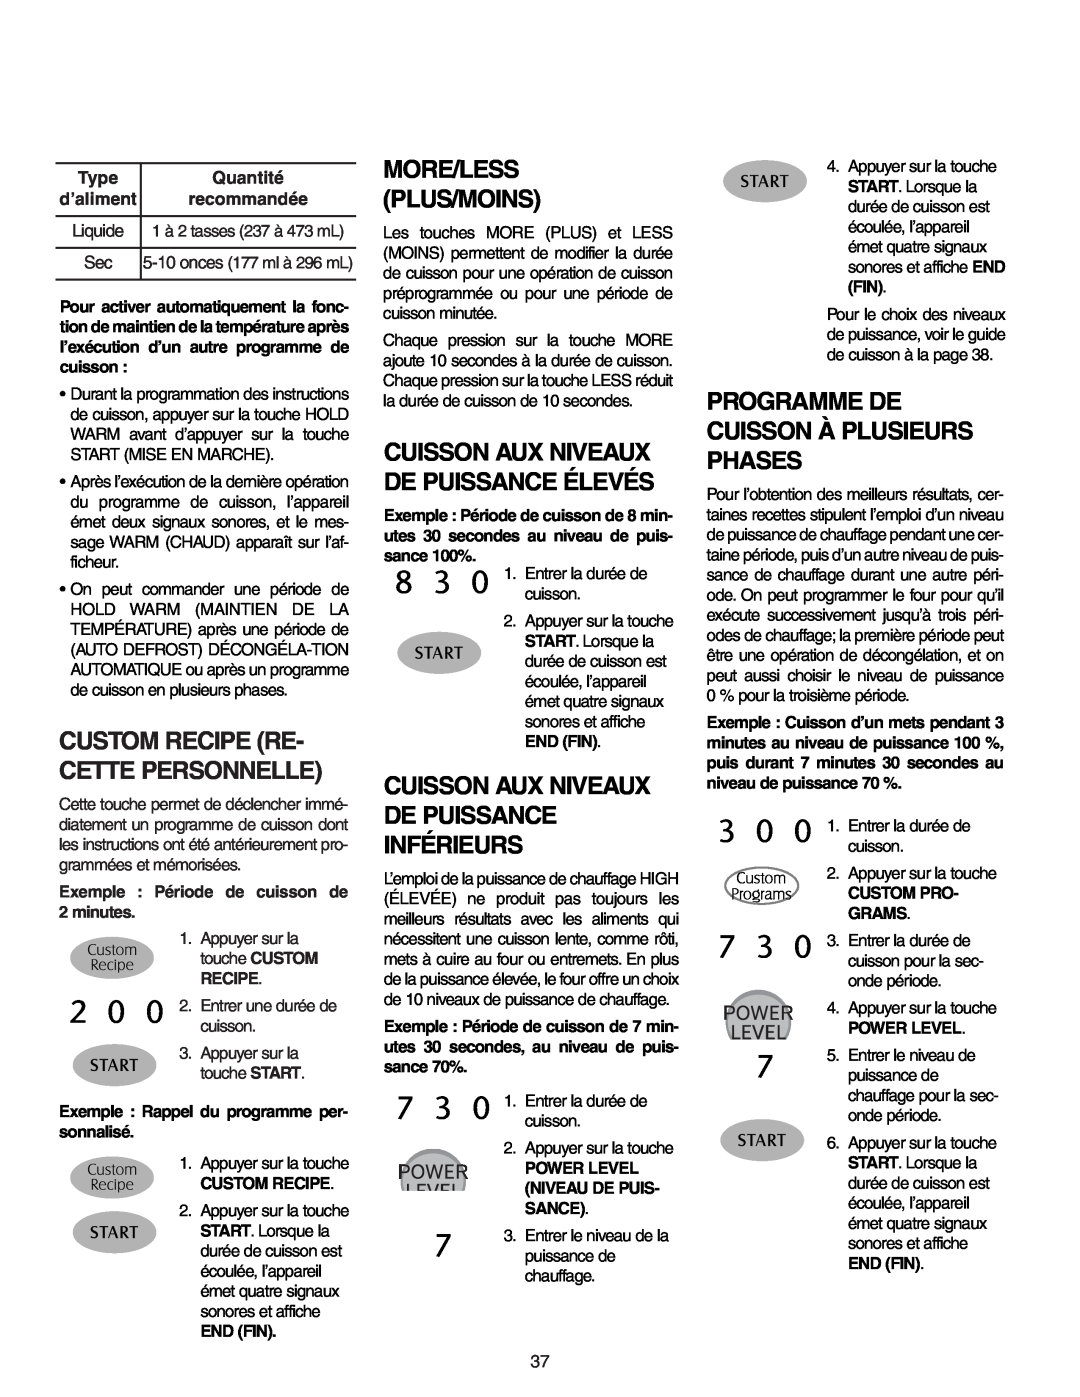 Maytag MMV51566AA/MMV5156AC owner manual 3 0 0, More/Less Plus/Moins, Programme De Cuisson À Plusieurs Phases 